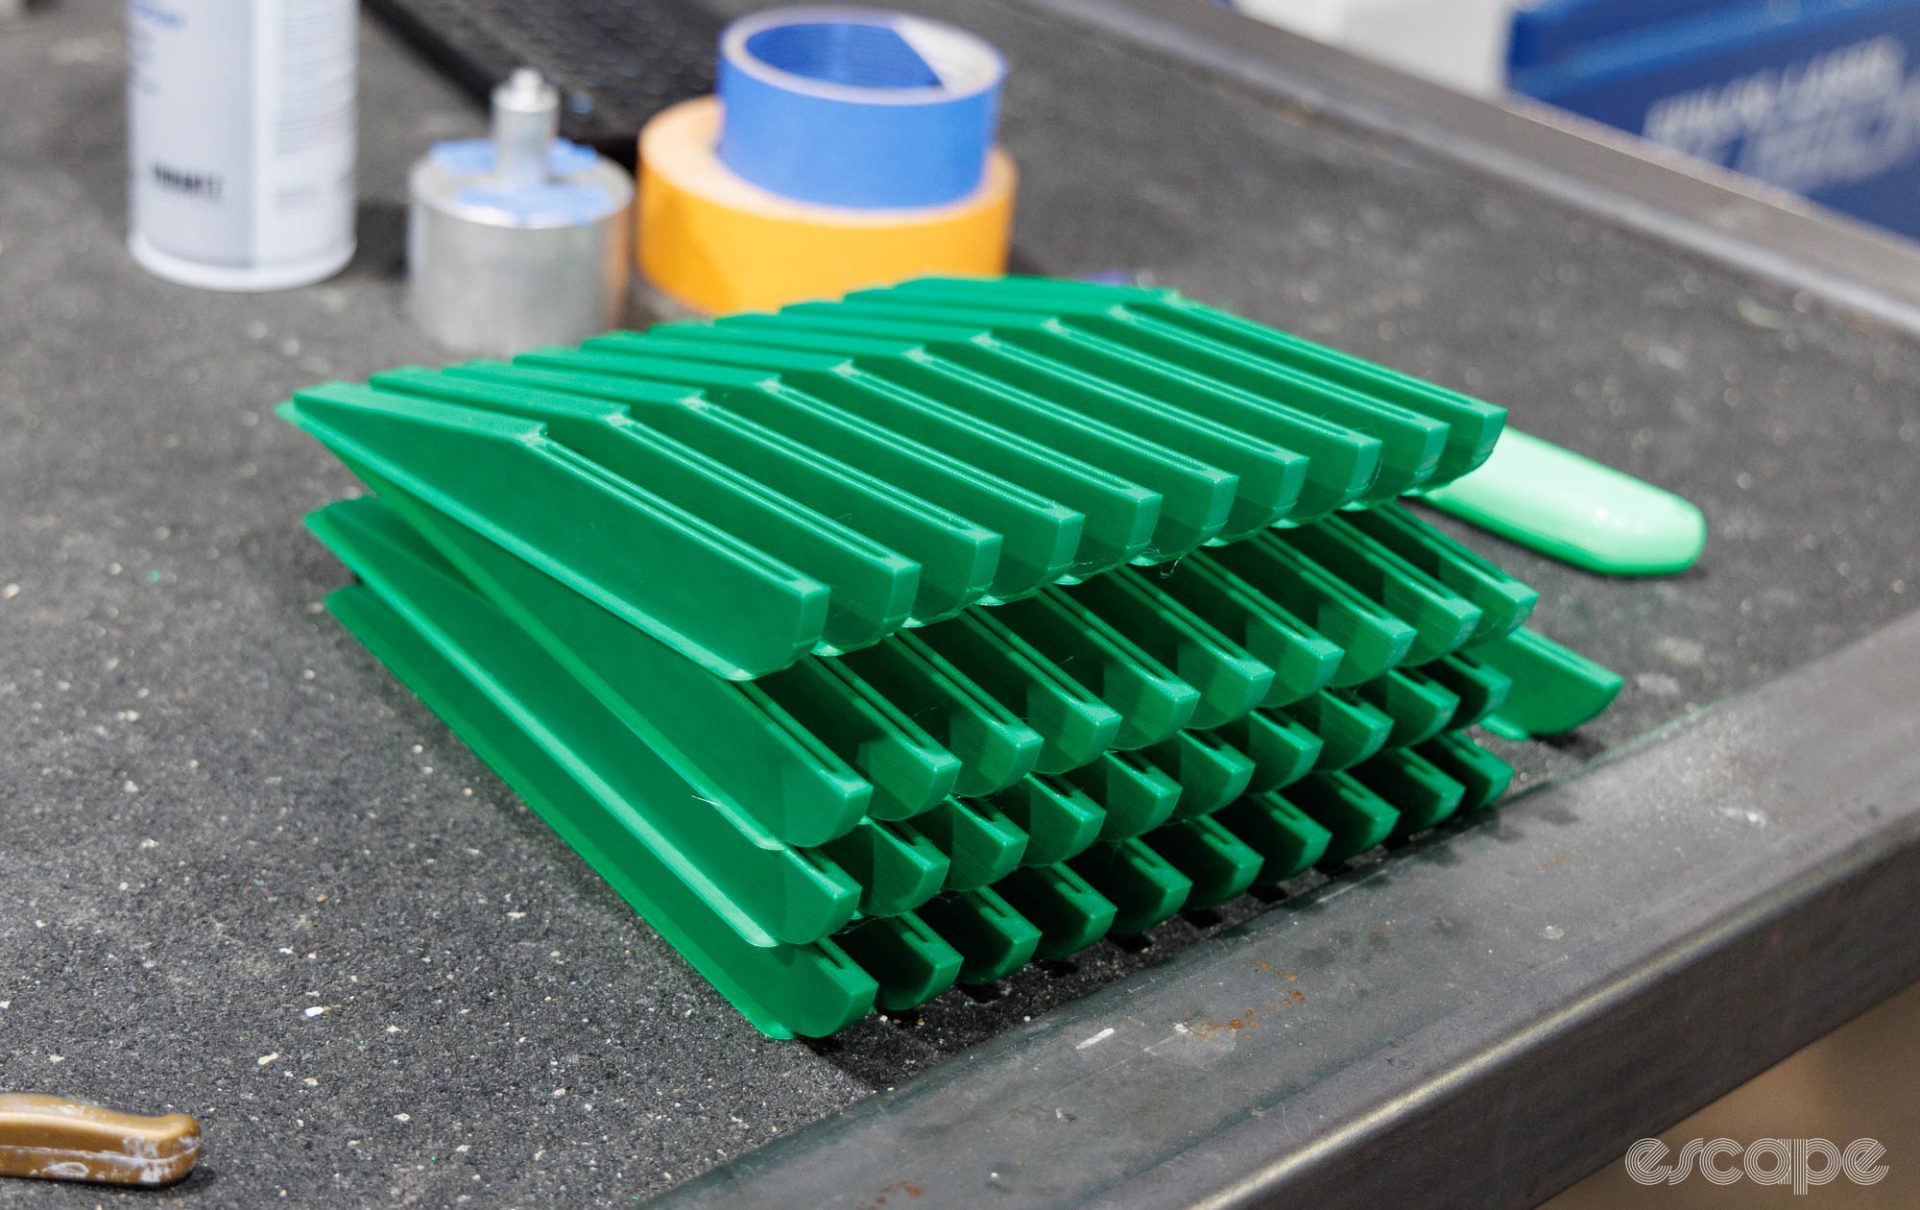 A stack of green plastic "PreHAG" tools sits on a bench.